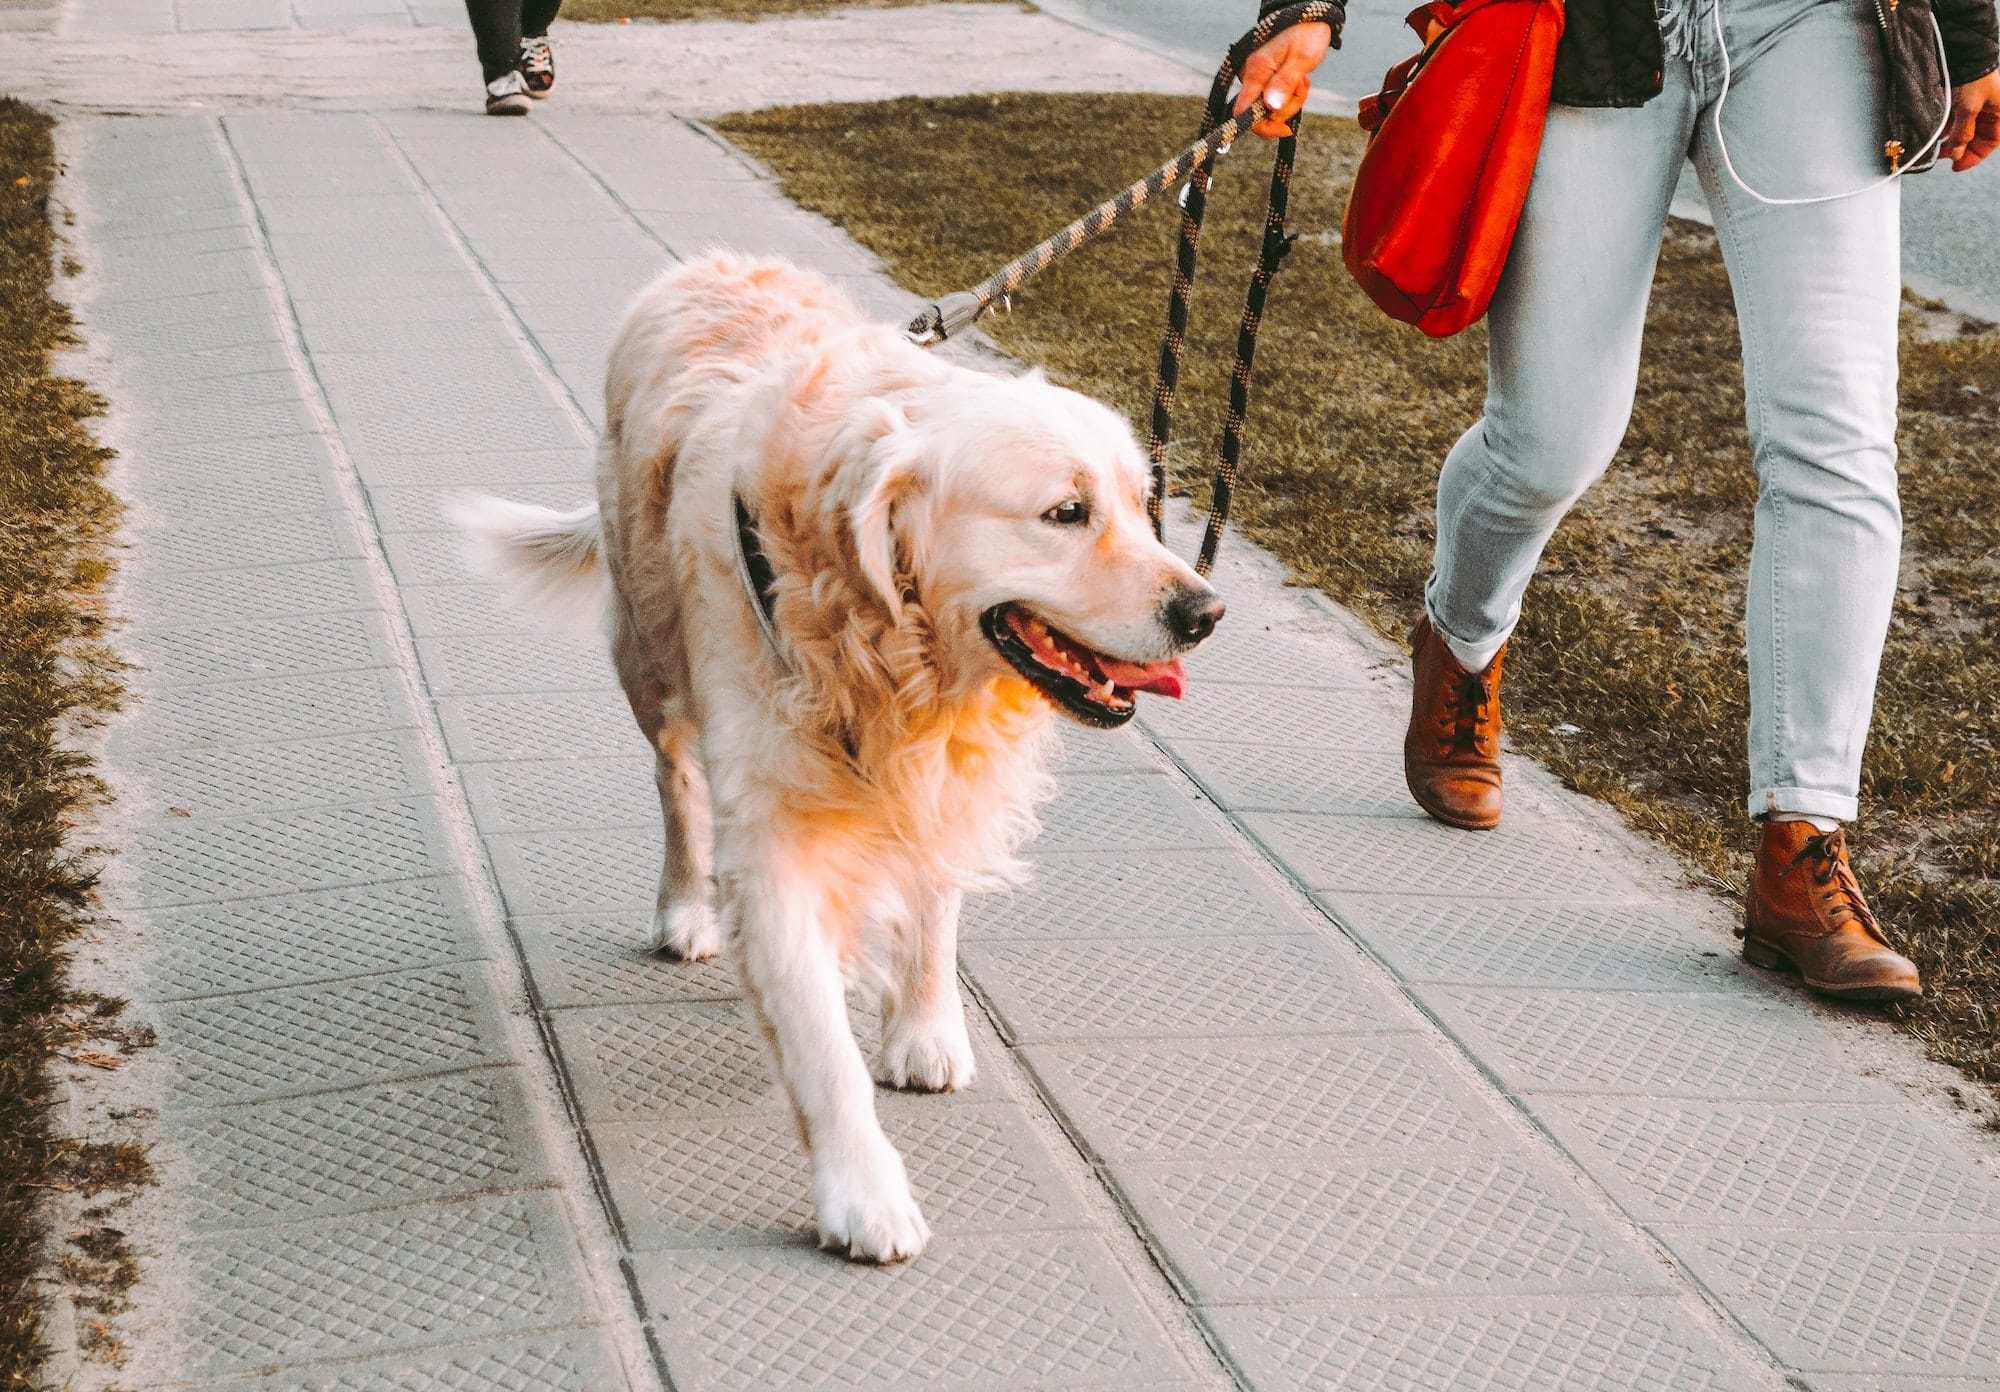 How often should you walk your dog?